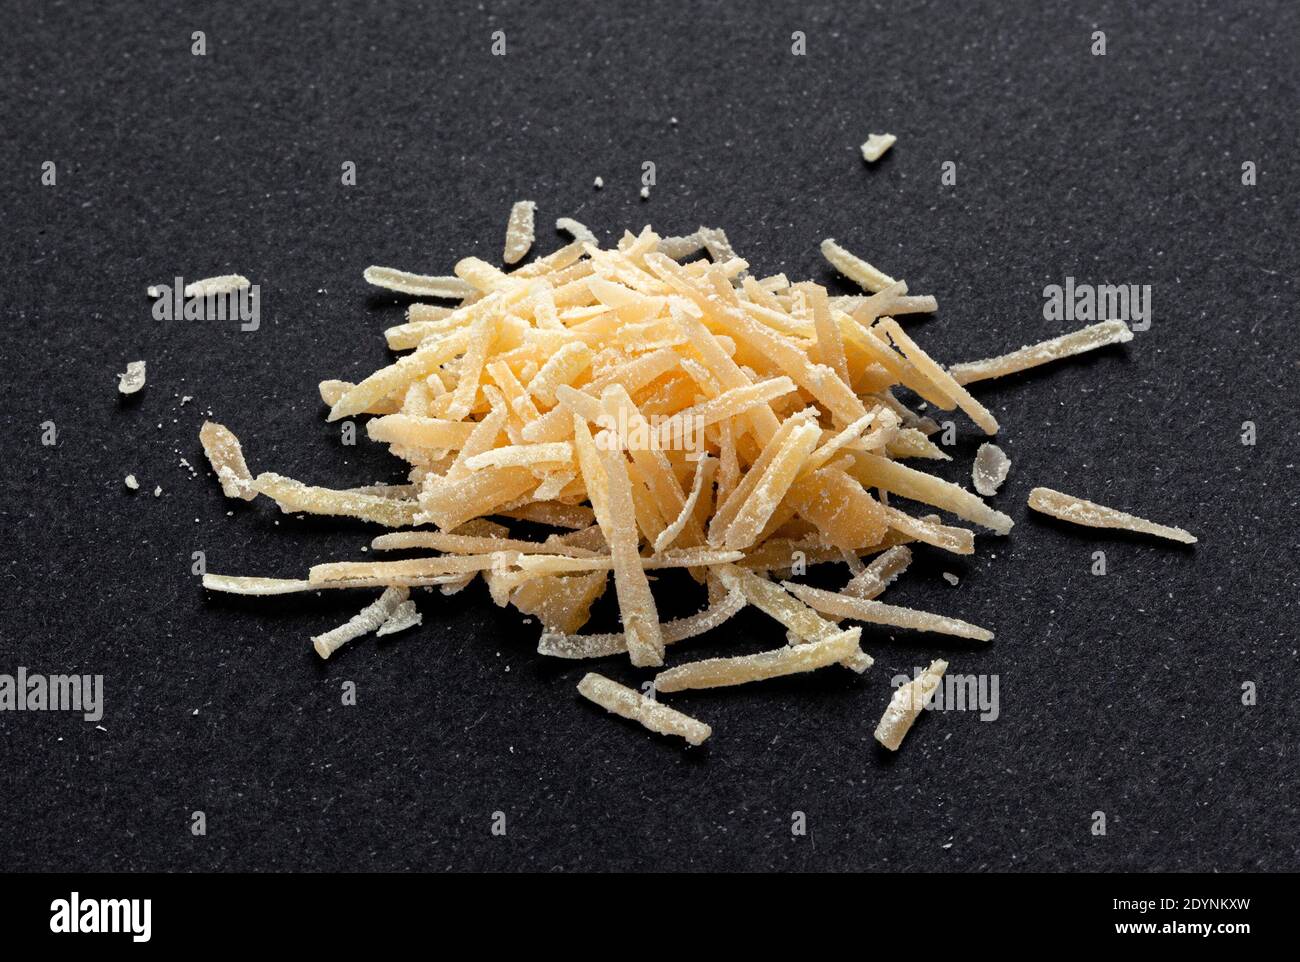 https://c8.alamy.com/comp/2DYNKXW/grated-parmesan-cheese-on-black-background-parmigiano-close-up-2DYNKXW.jpg